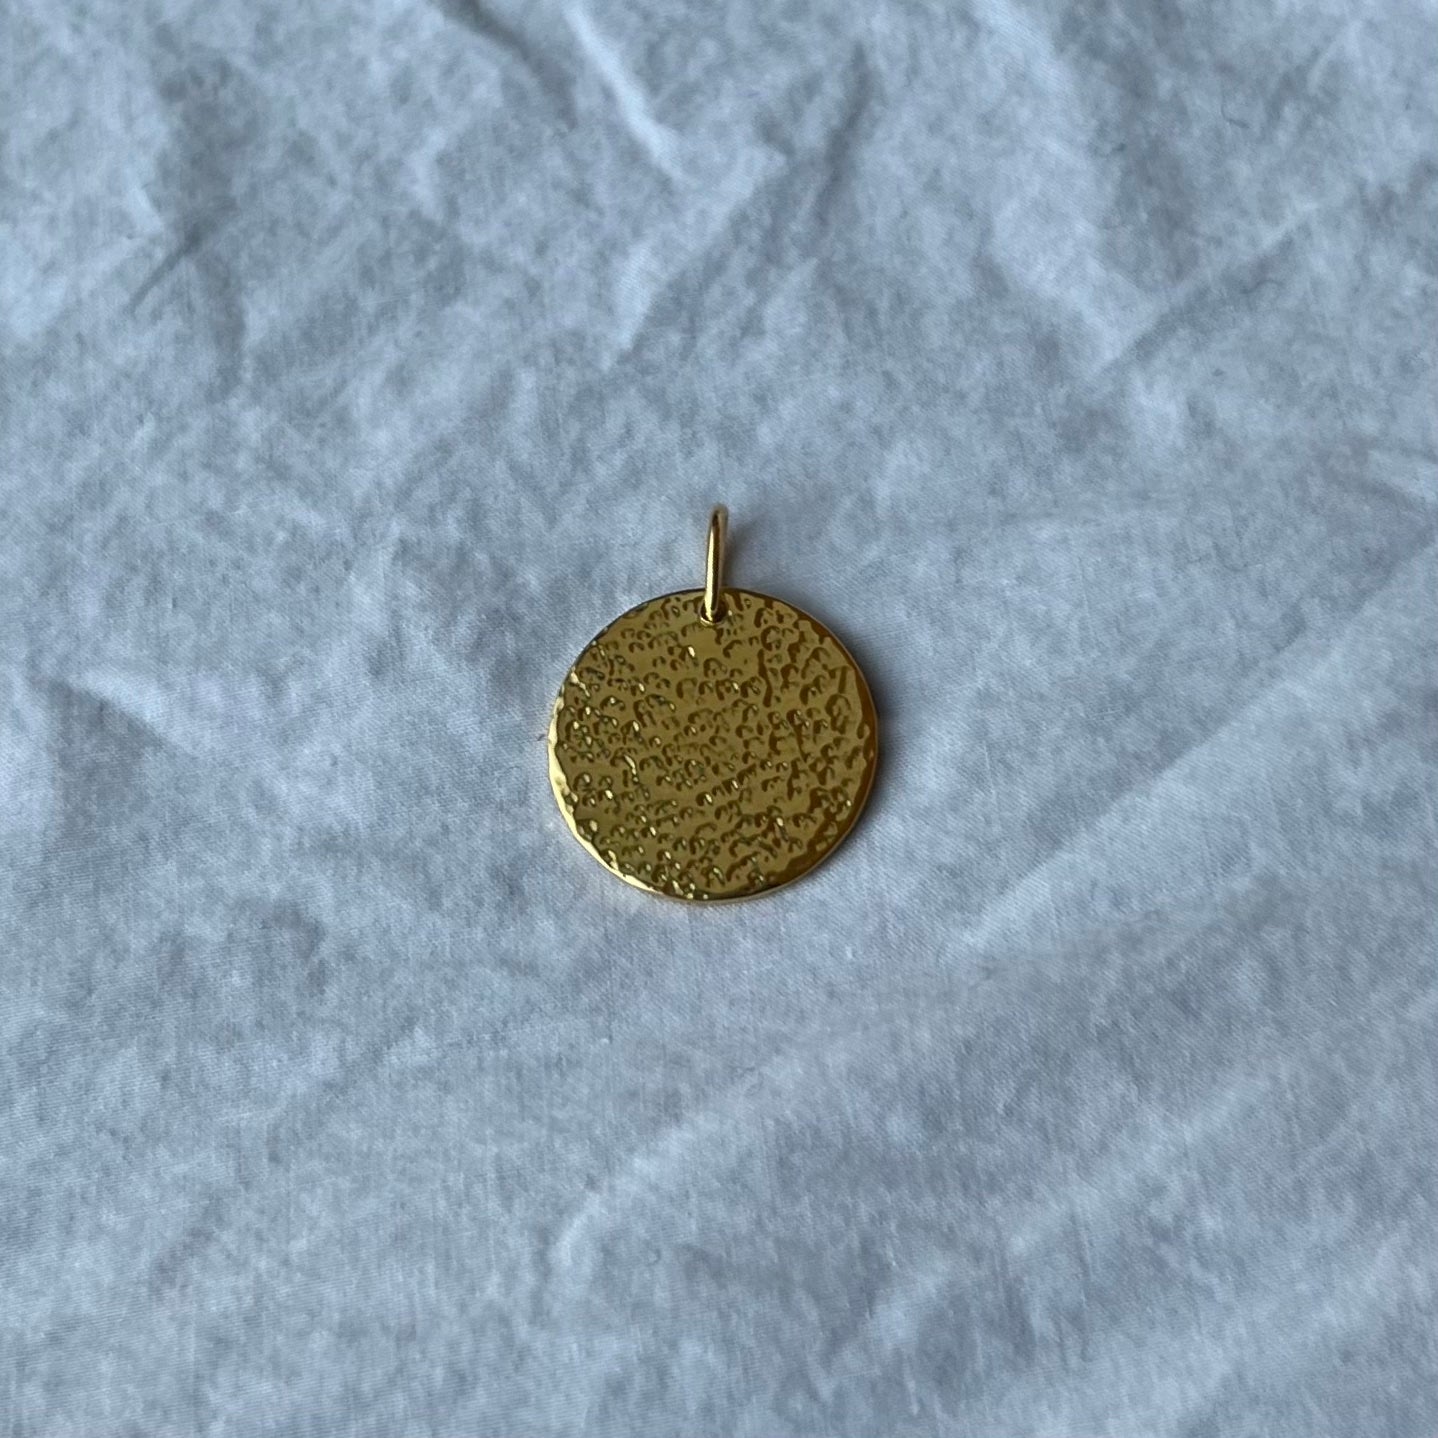 A gold vermeil hammered texture disc charm on a white linen background.